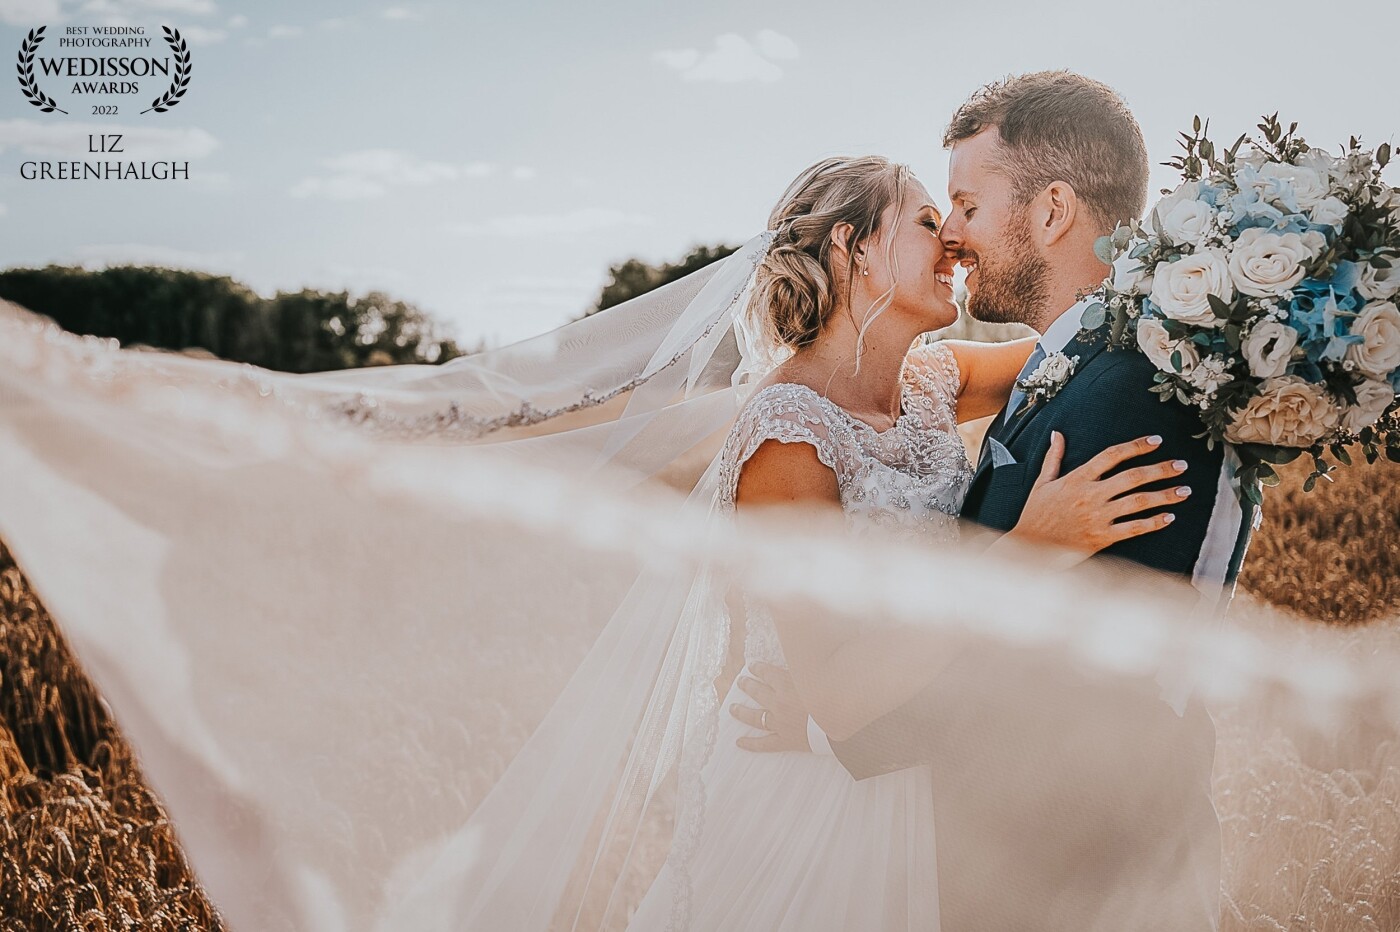 We had been taking photos in the corn field when the wind whipped the veil around the couple. It was a gorgeous moment that we made the most of